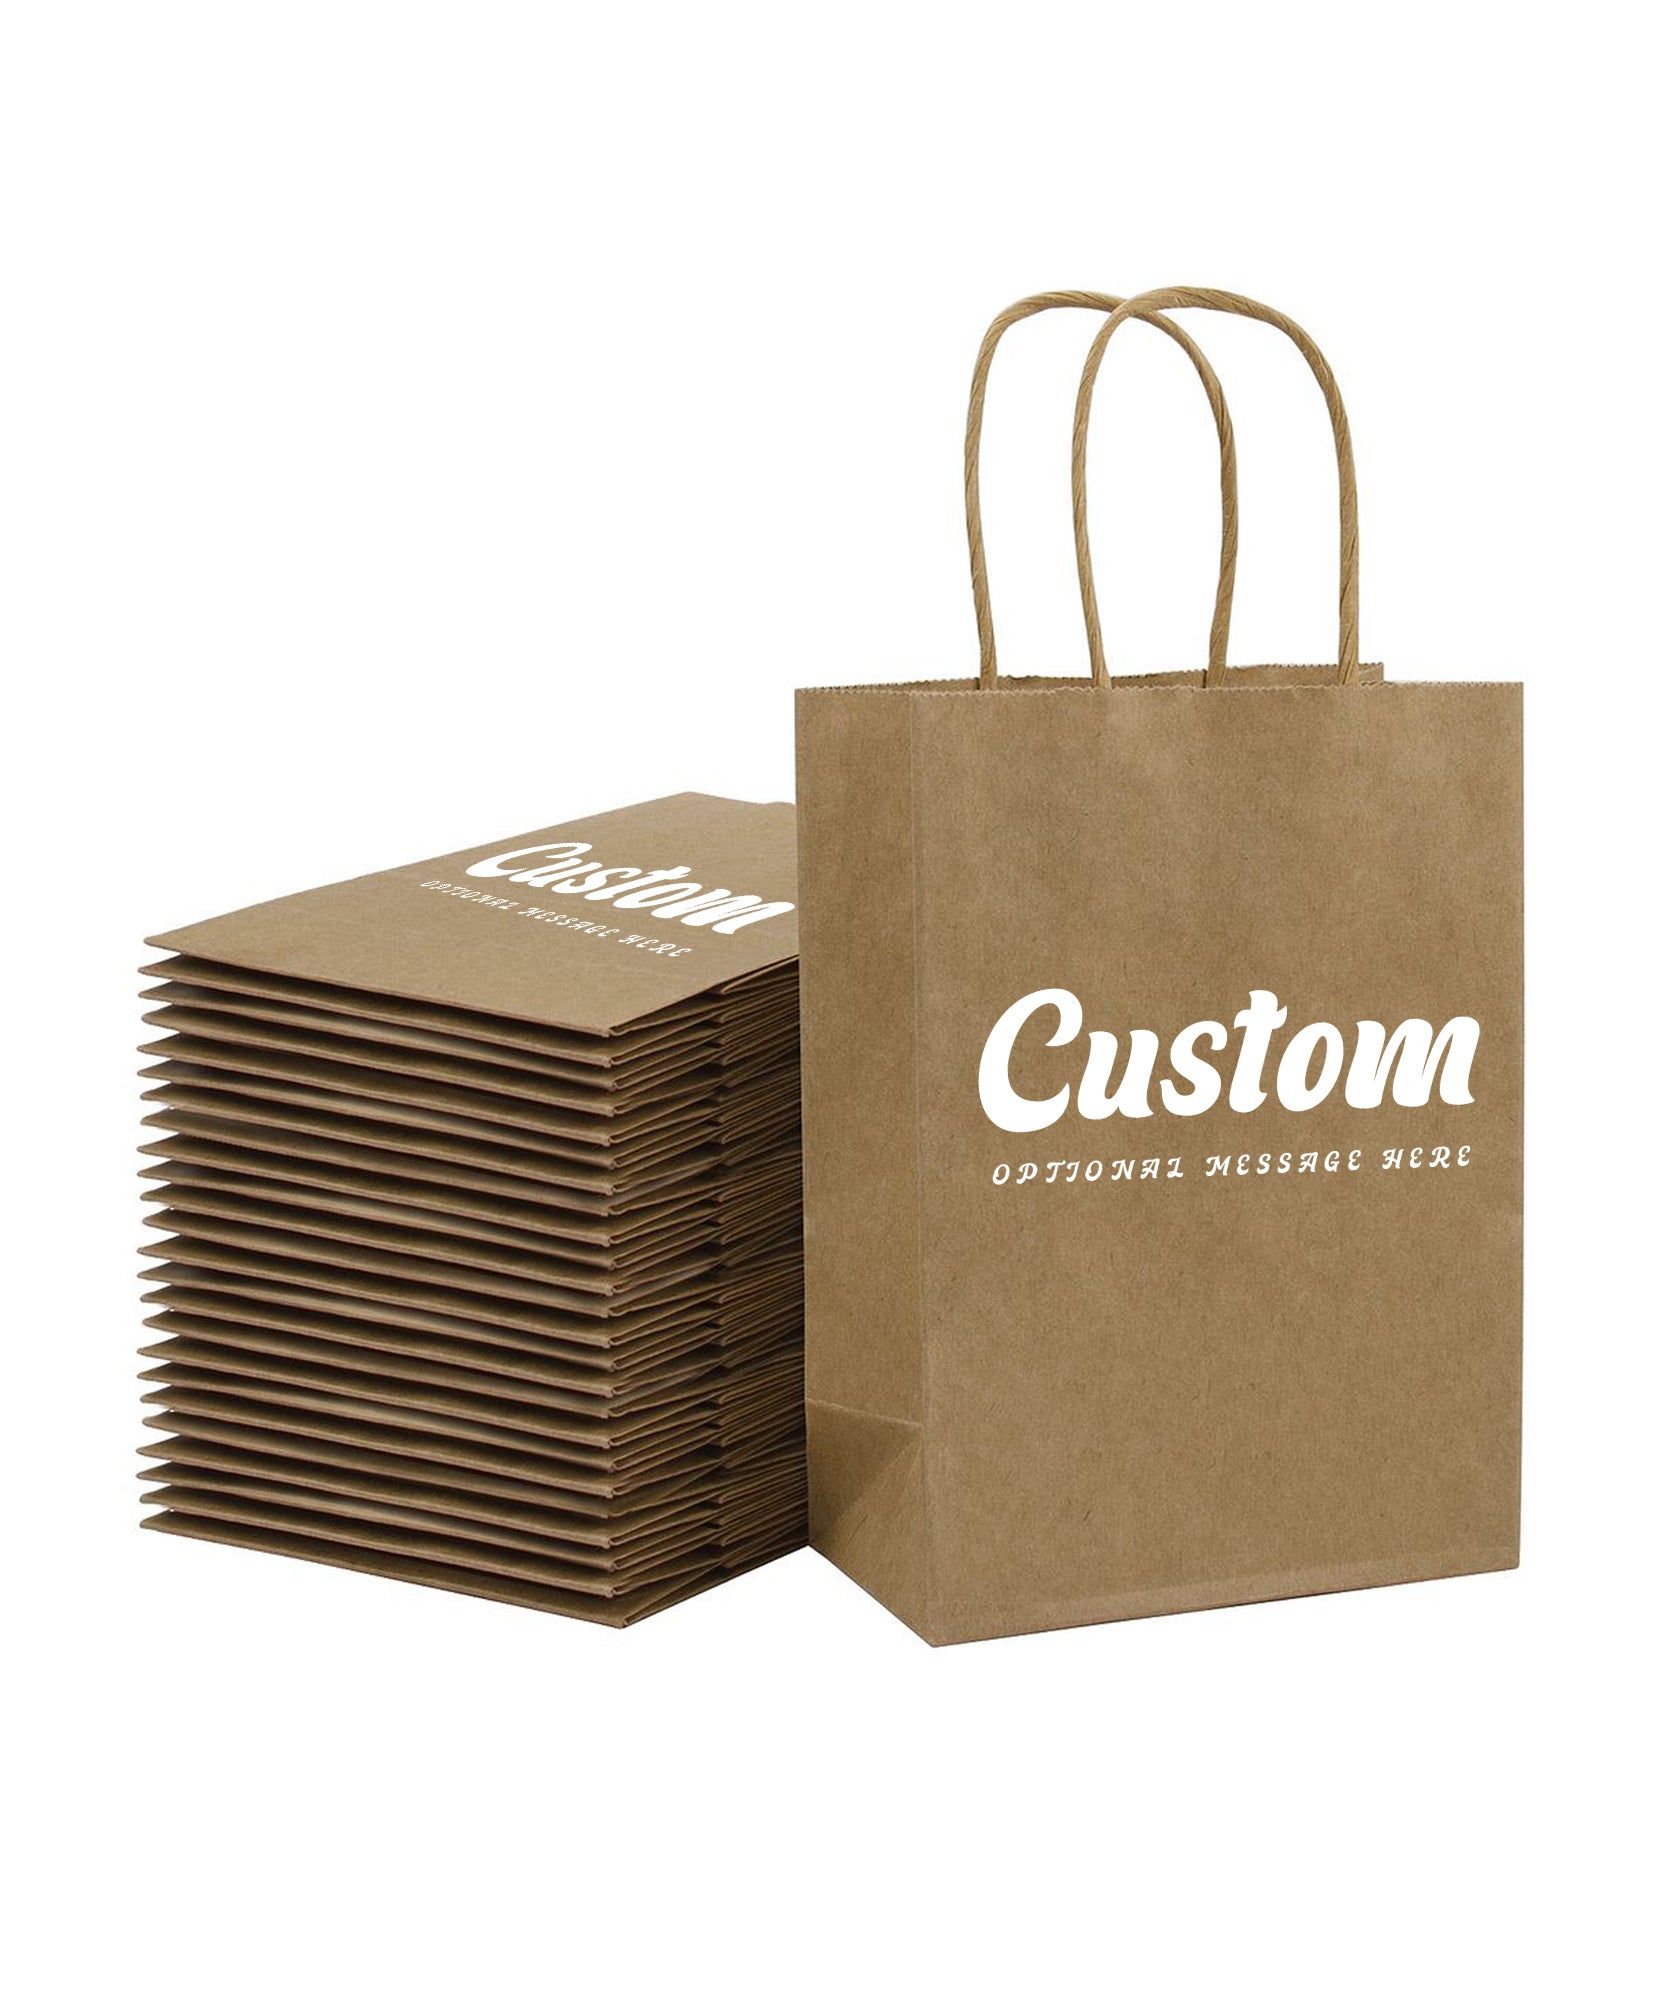 Impress recipients by giving out these custom bags for their purchases or as special event gift bags.